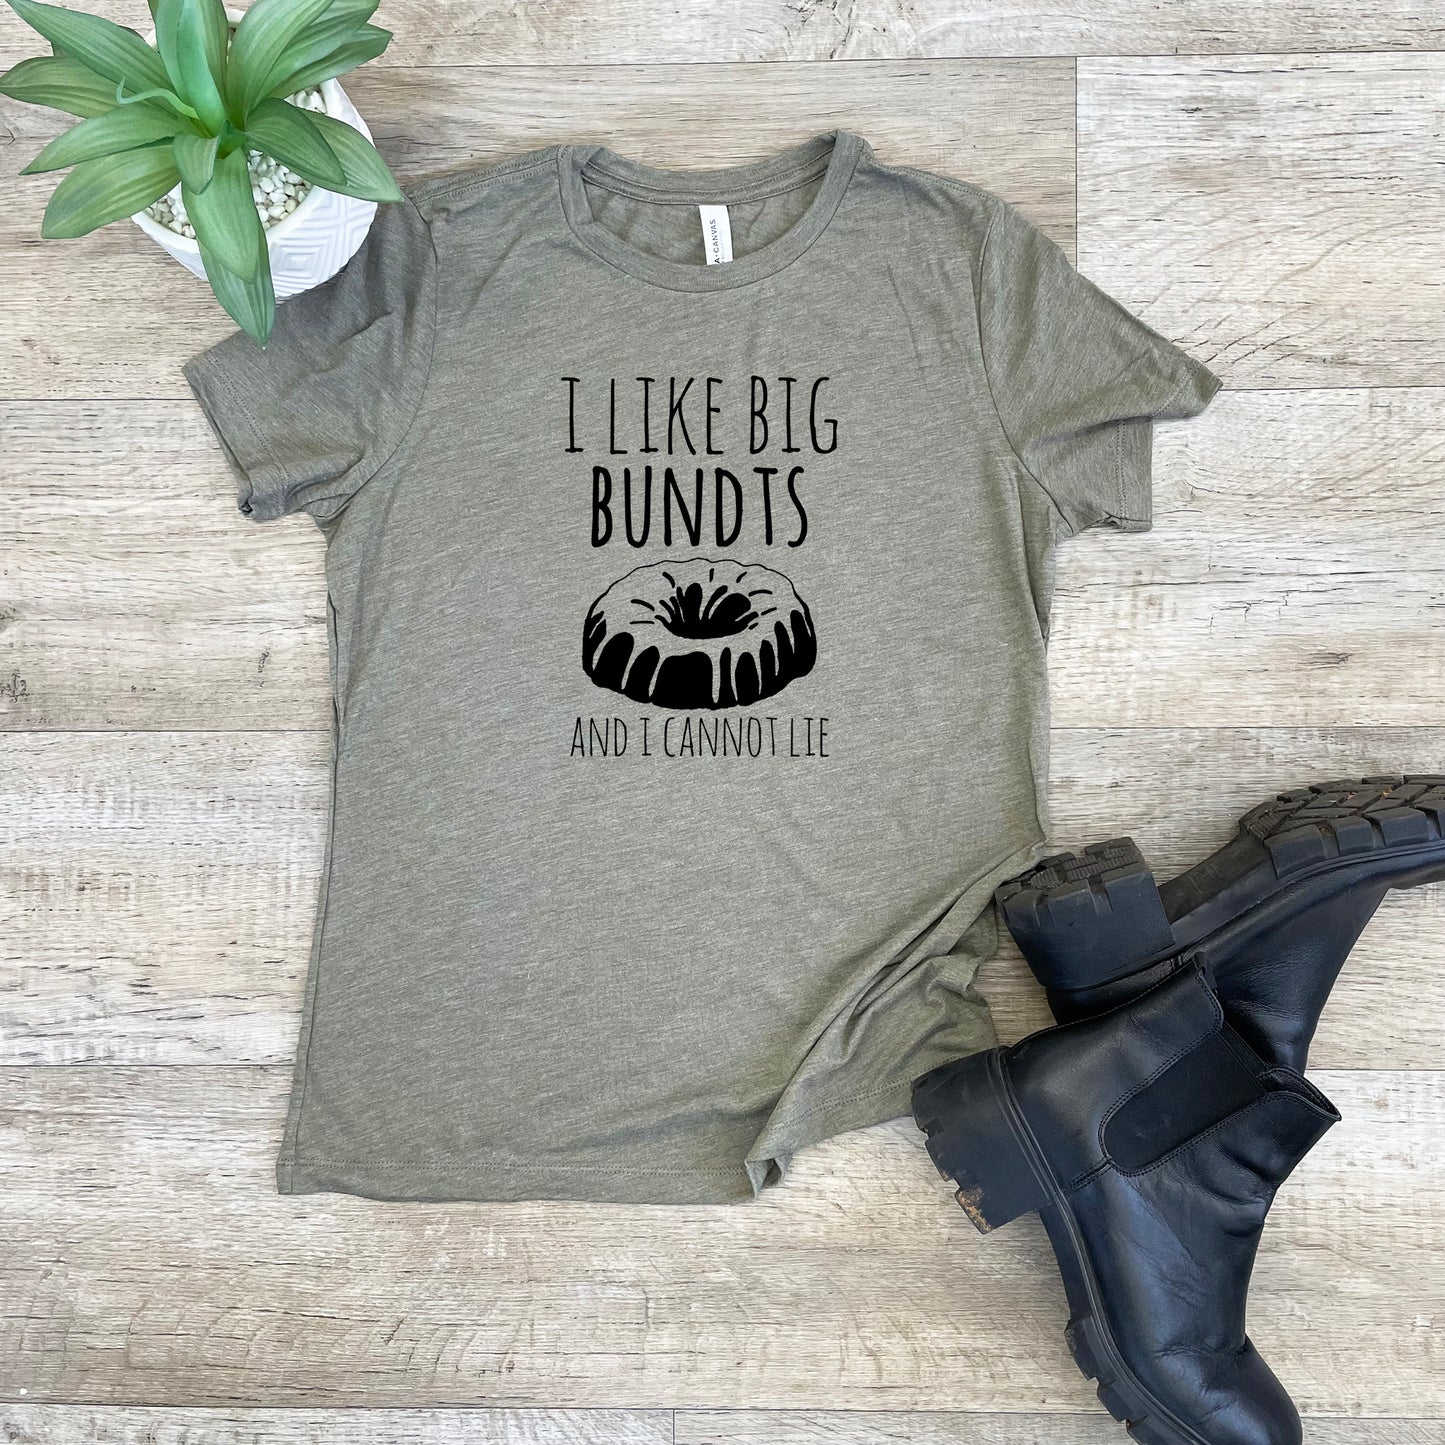 I Like Big Bundts and I Cannot Lie - Women's Crew Tee - Olive or Dusty Blue